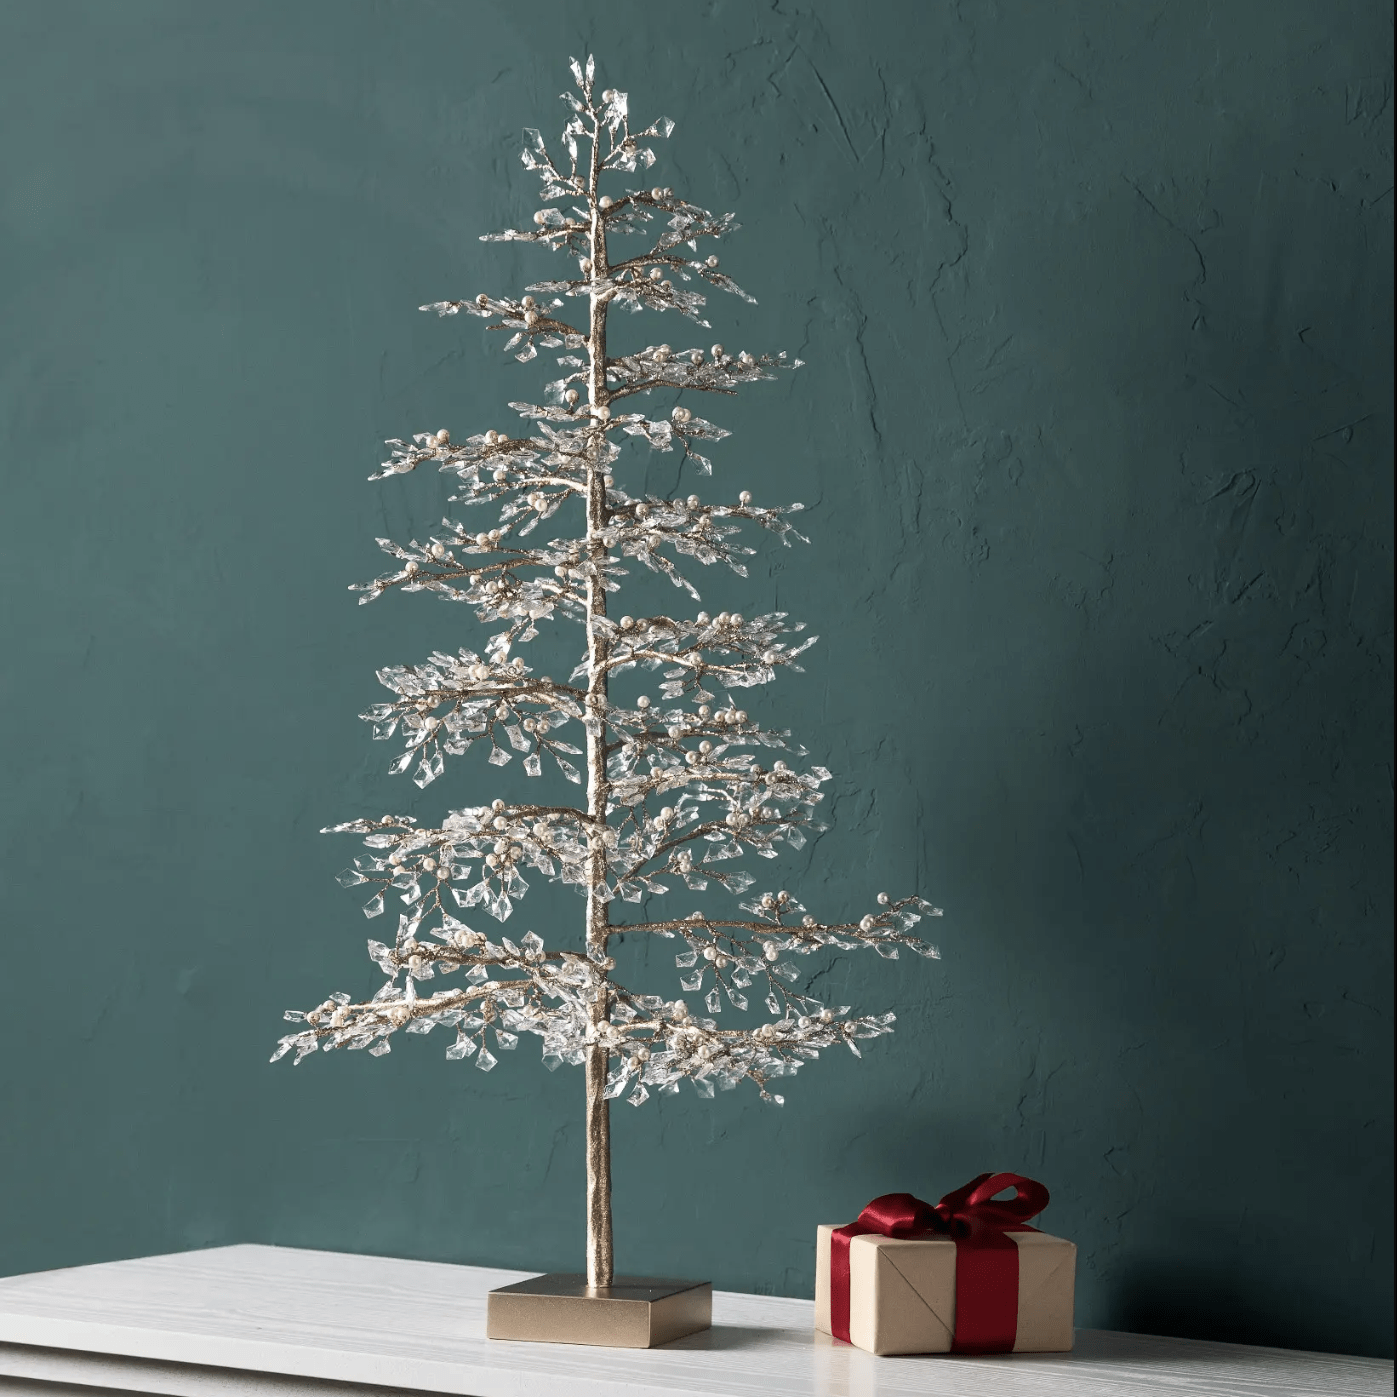 Need Cheering Up? Get a Lovie from The Twig — Trendy Tree